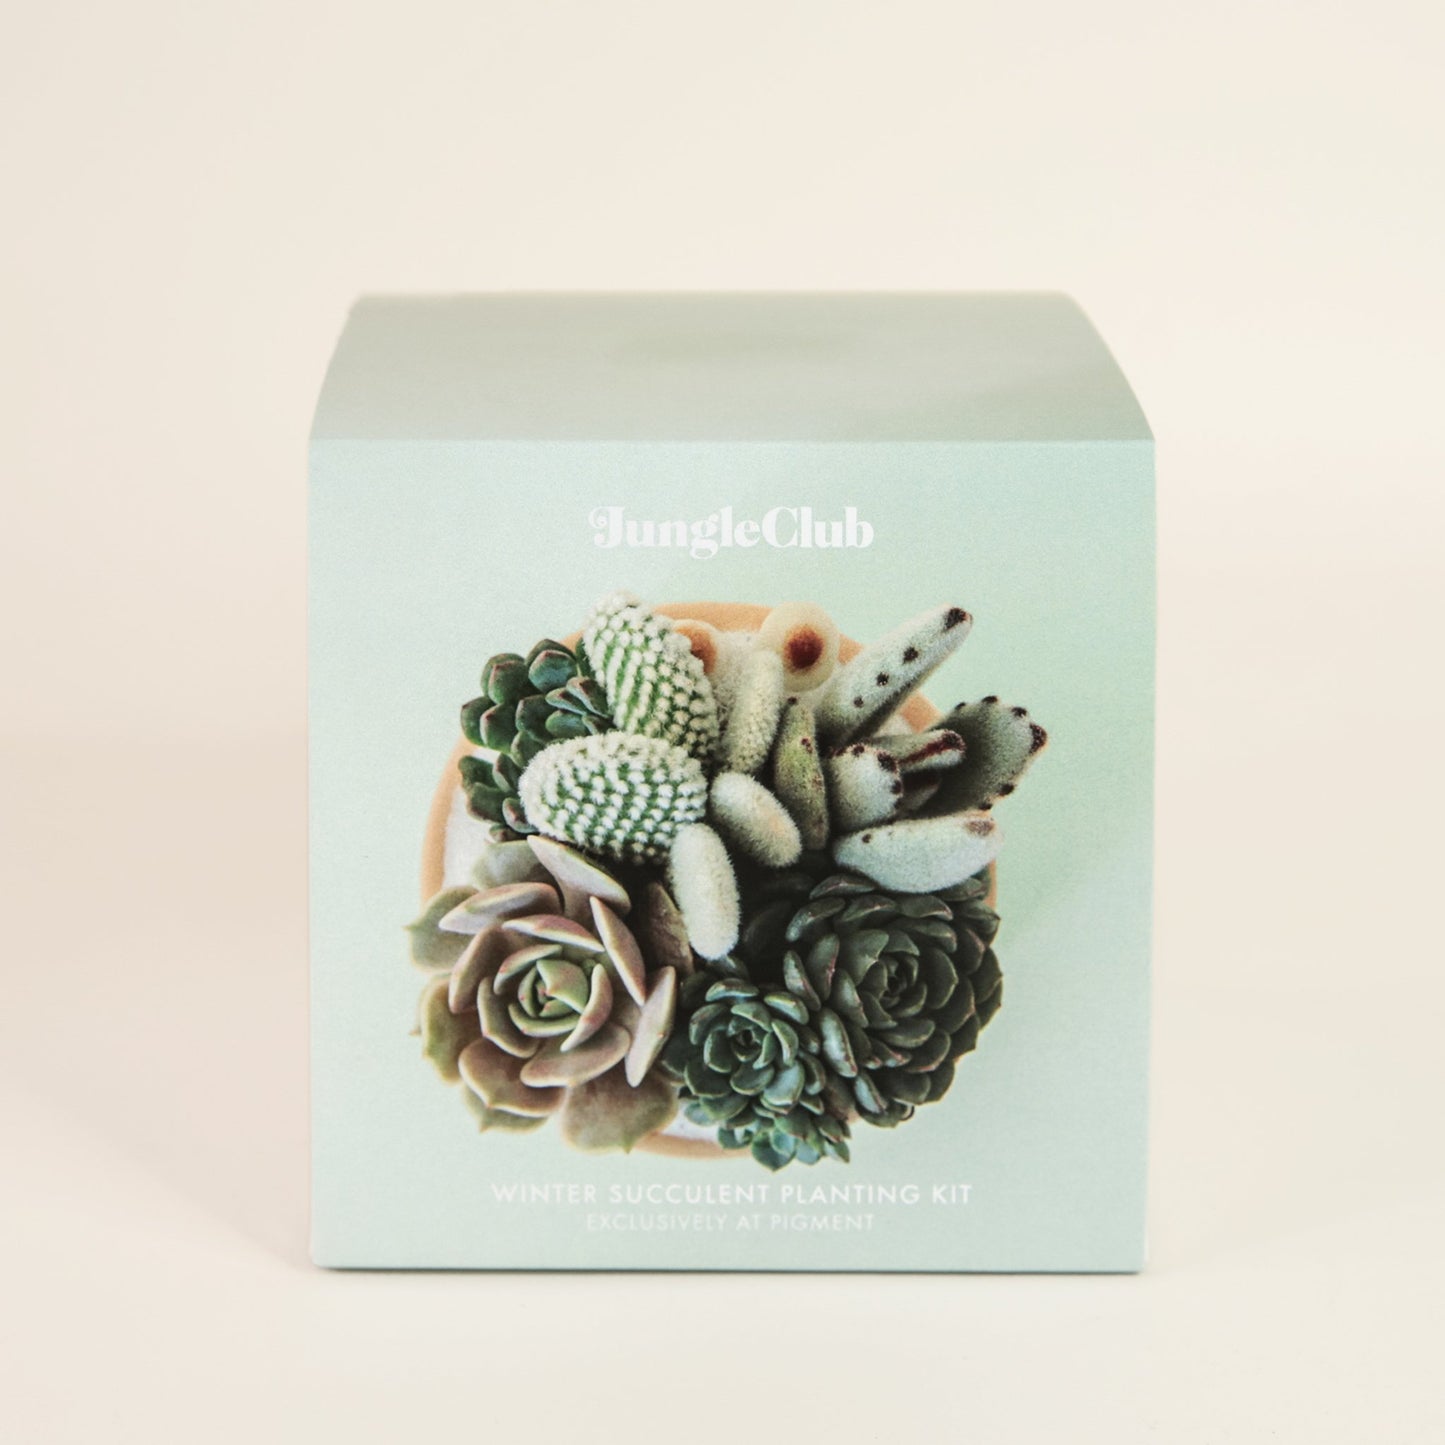 Light blue packaging of small planting kit. The packaging is light lavender and includes an image of a completed succulent planting and is labeled 'JungleClub'. 